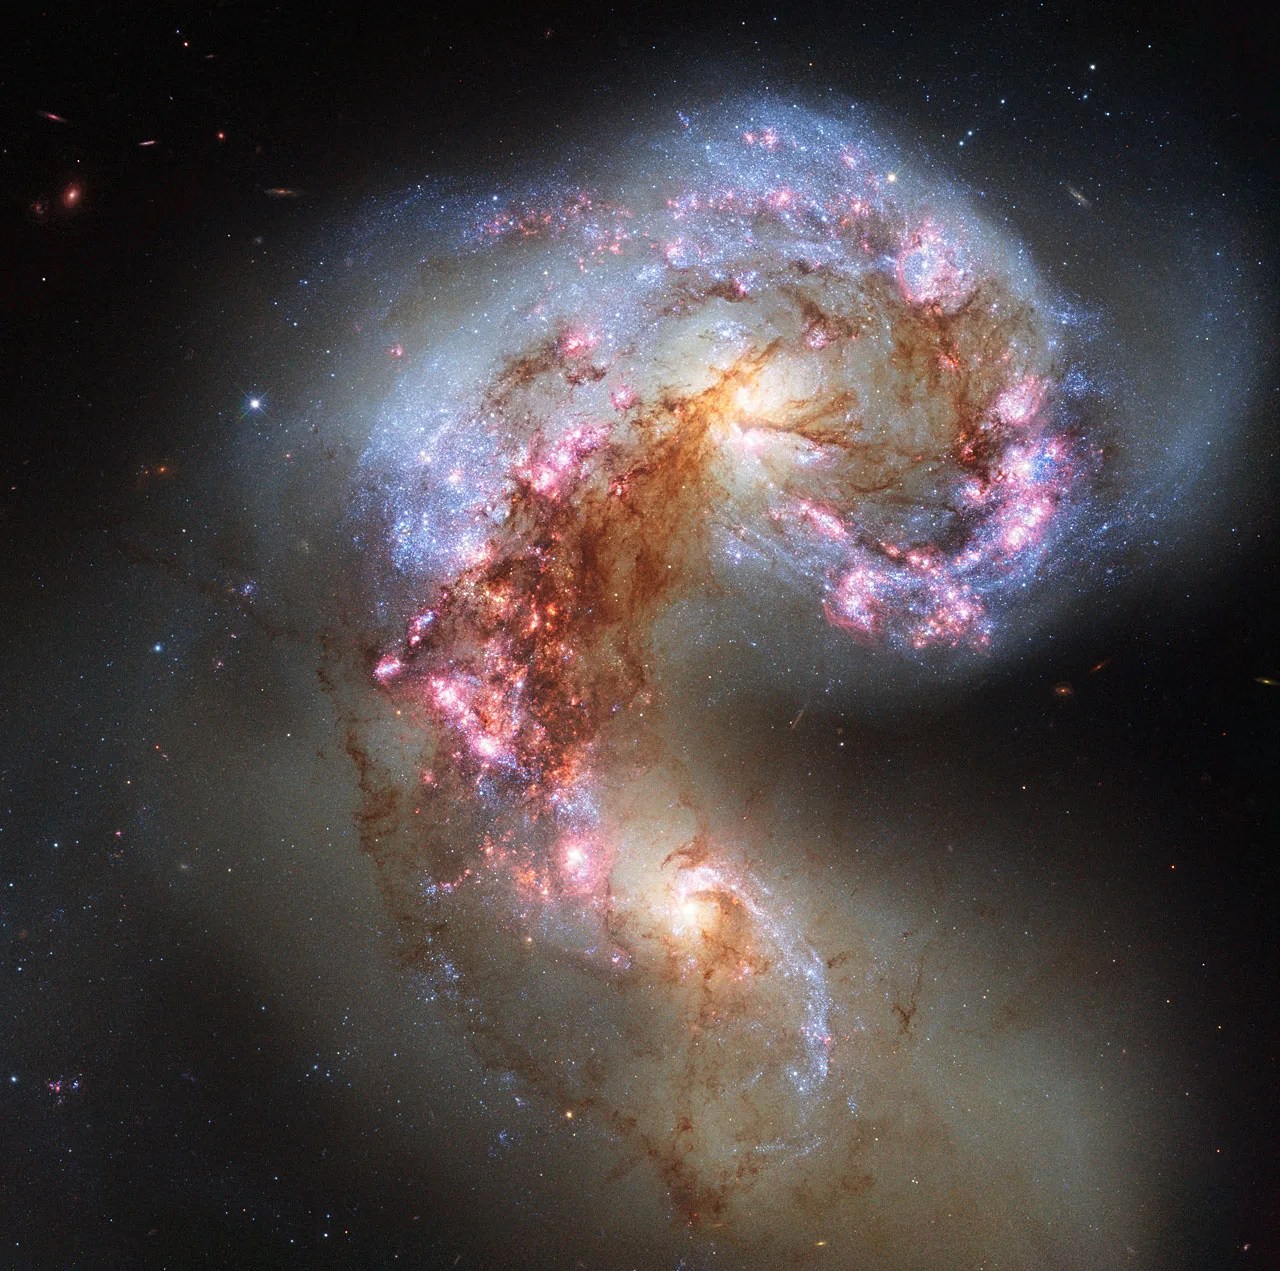 Violent swirl of distorted galaxies with blue lanes of stars, pink star-formation areas and darker filaments of dust